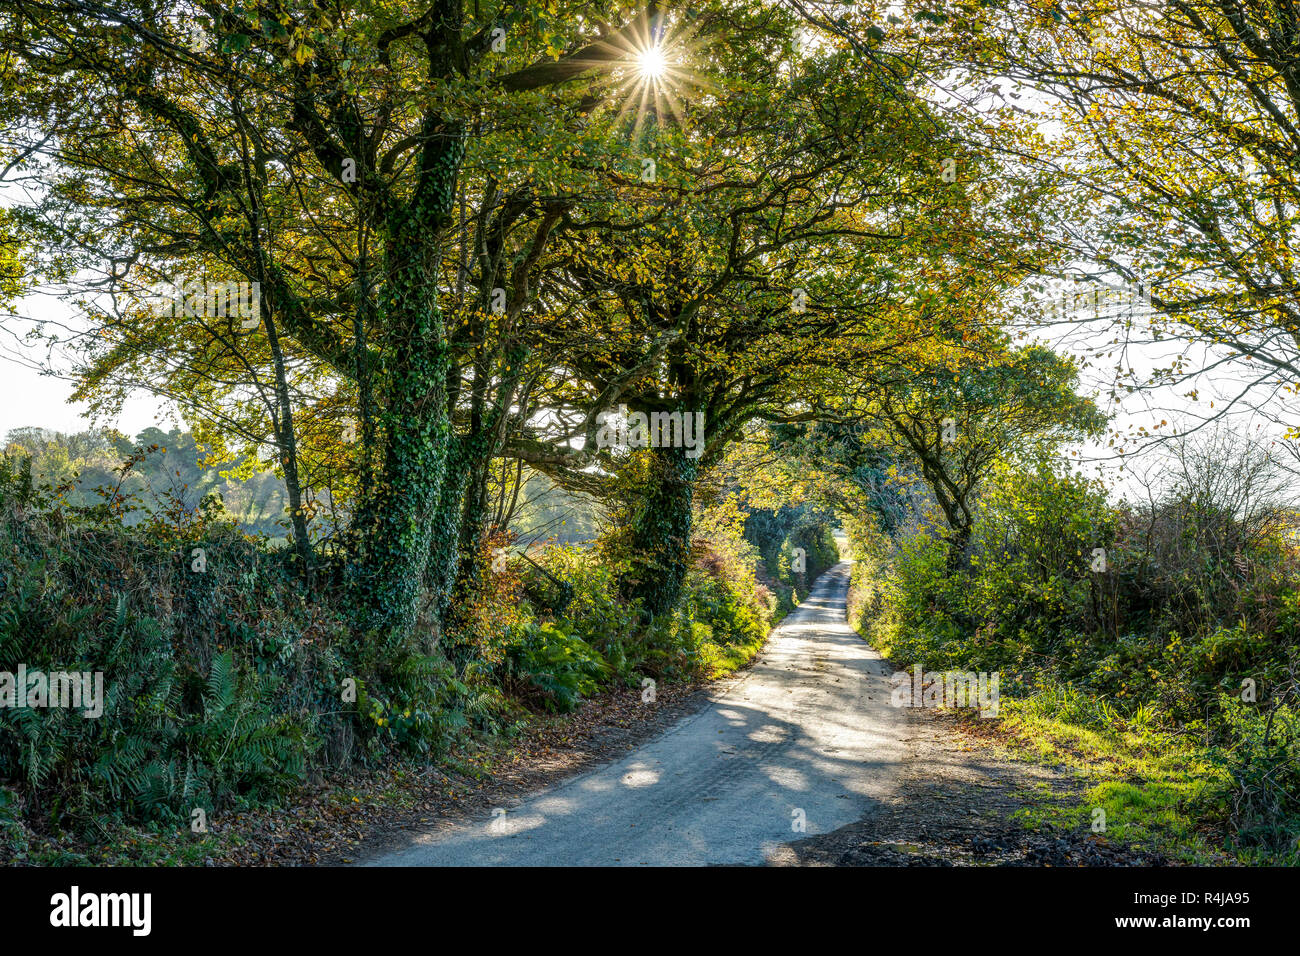 A sunny autumnal landscape showing a rural tree and hedge lined tarmac country lane, colours of golden yellow and brown, sunburst through the foliage. Stock Photo